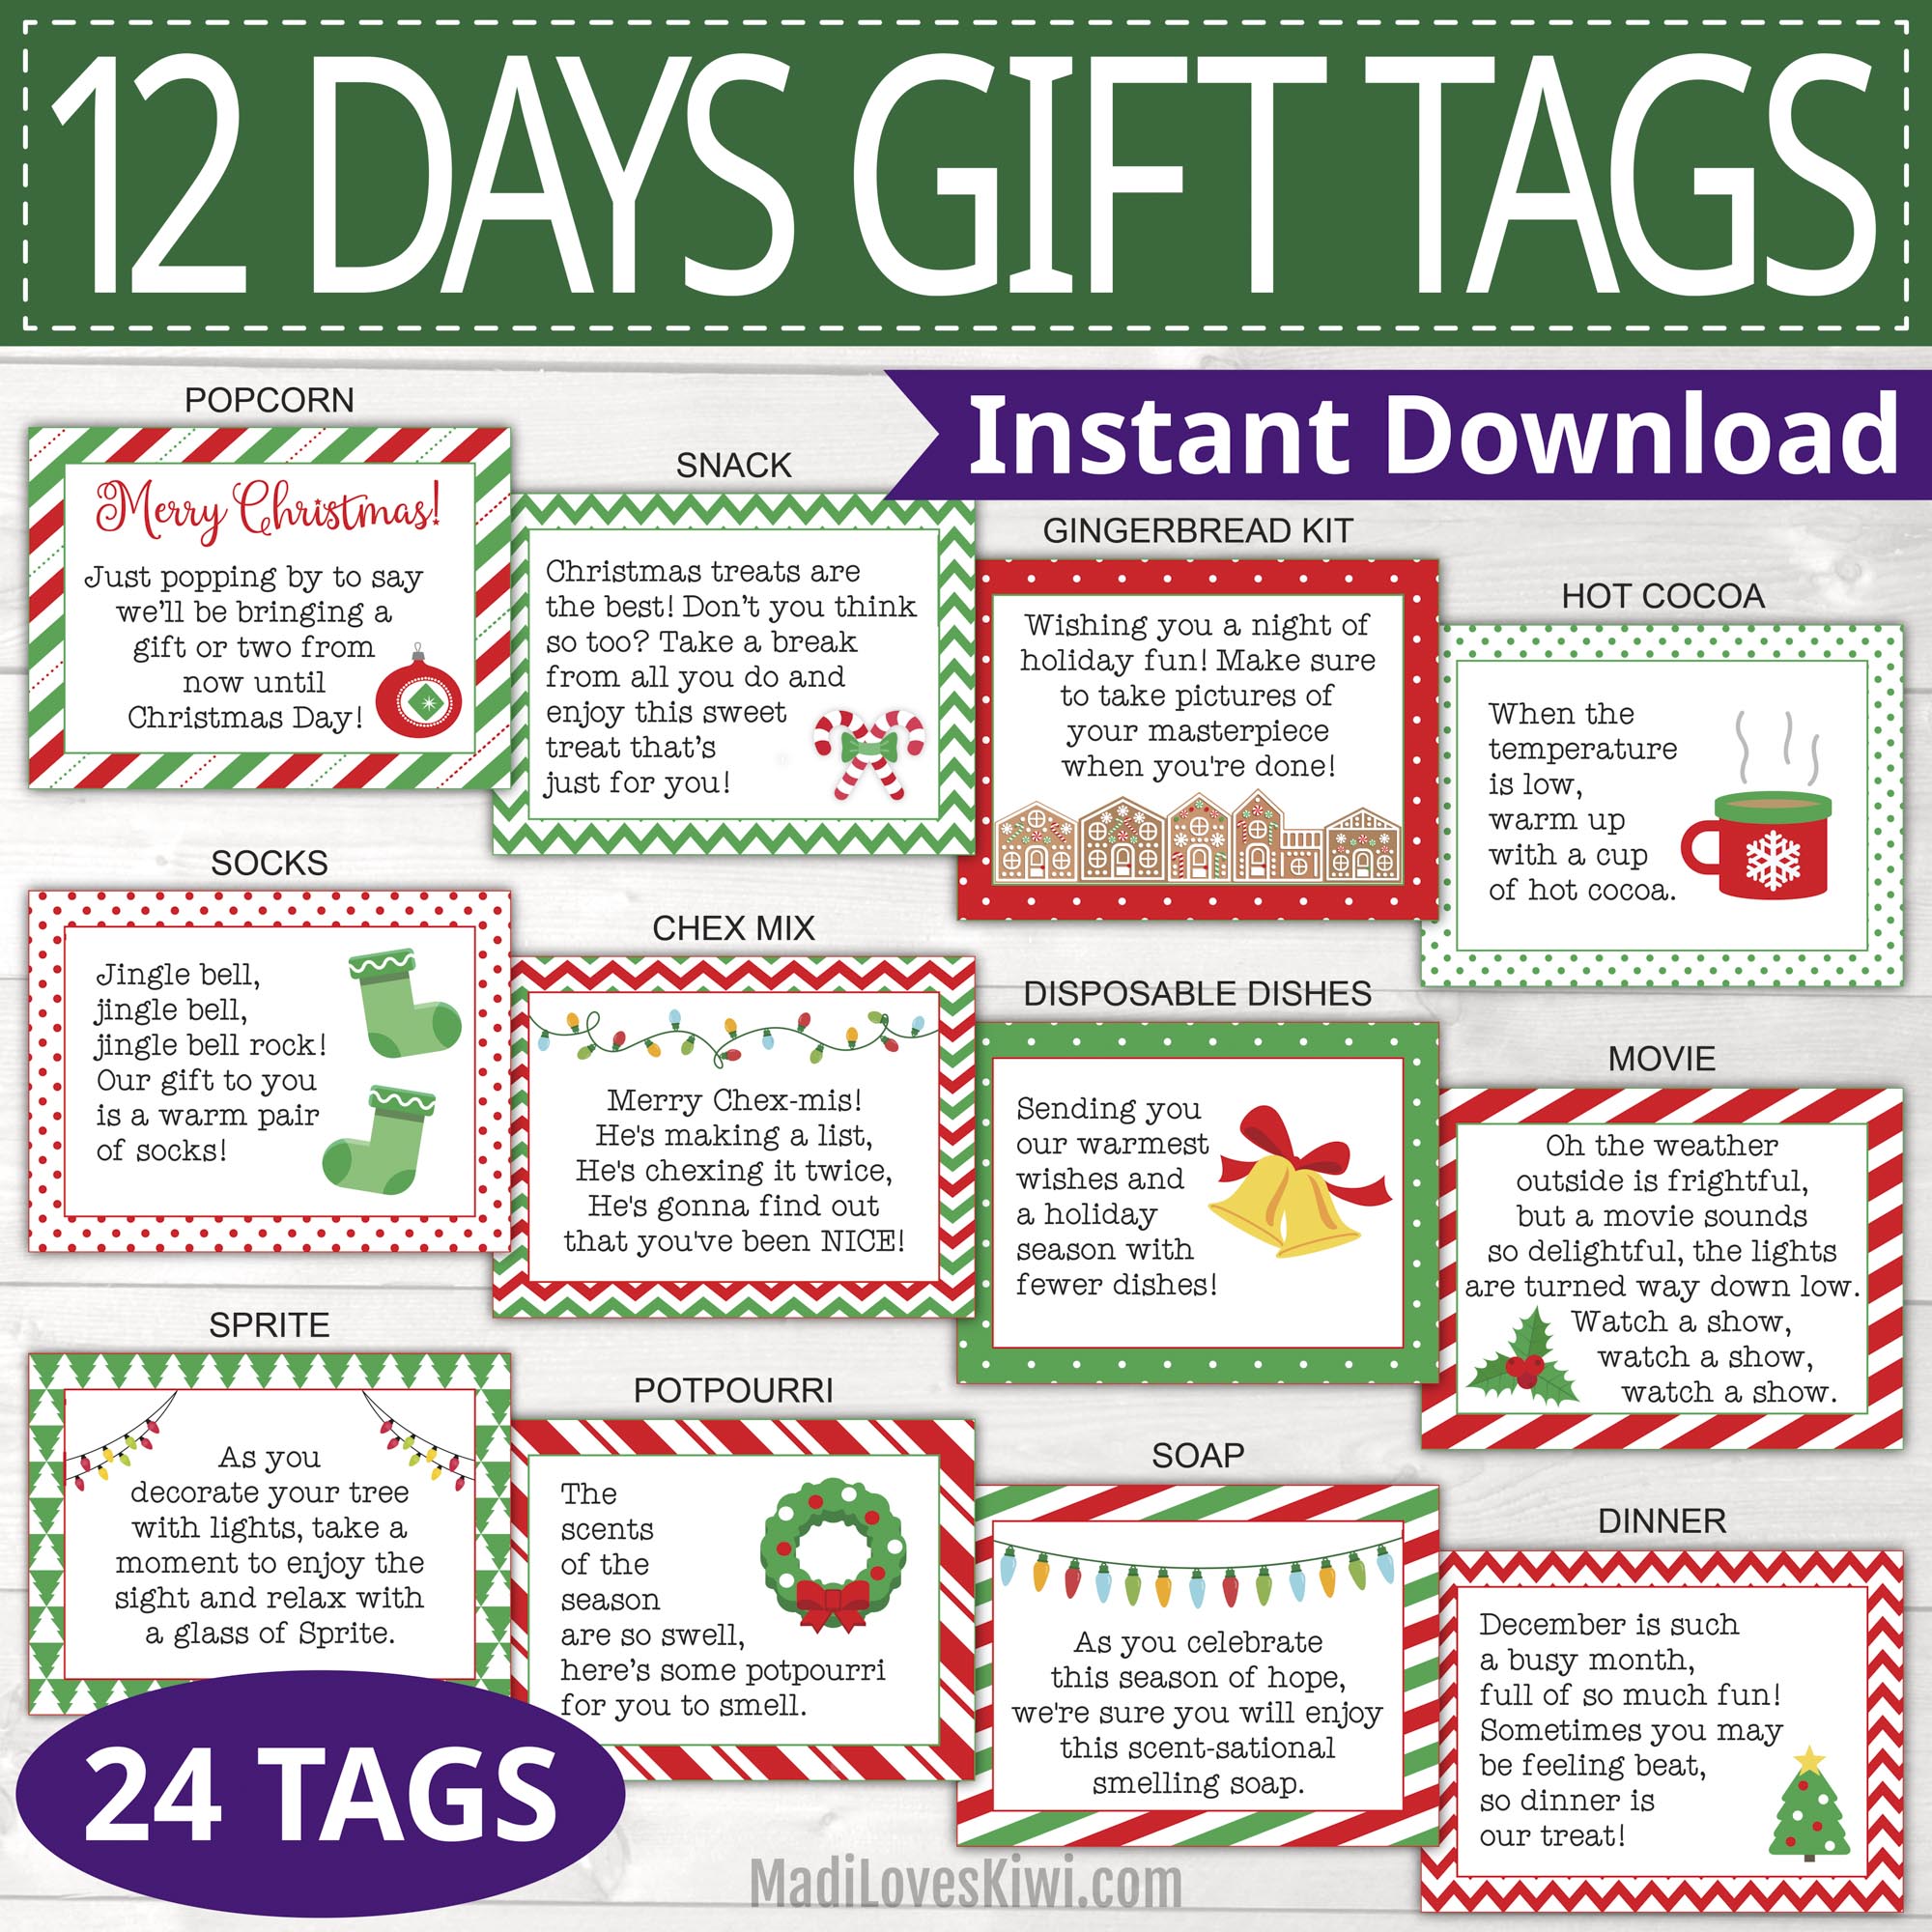 12 Days of Christmas: What They Are, How Much They Cost & More